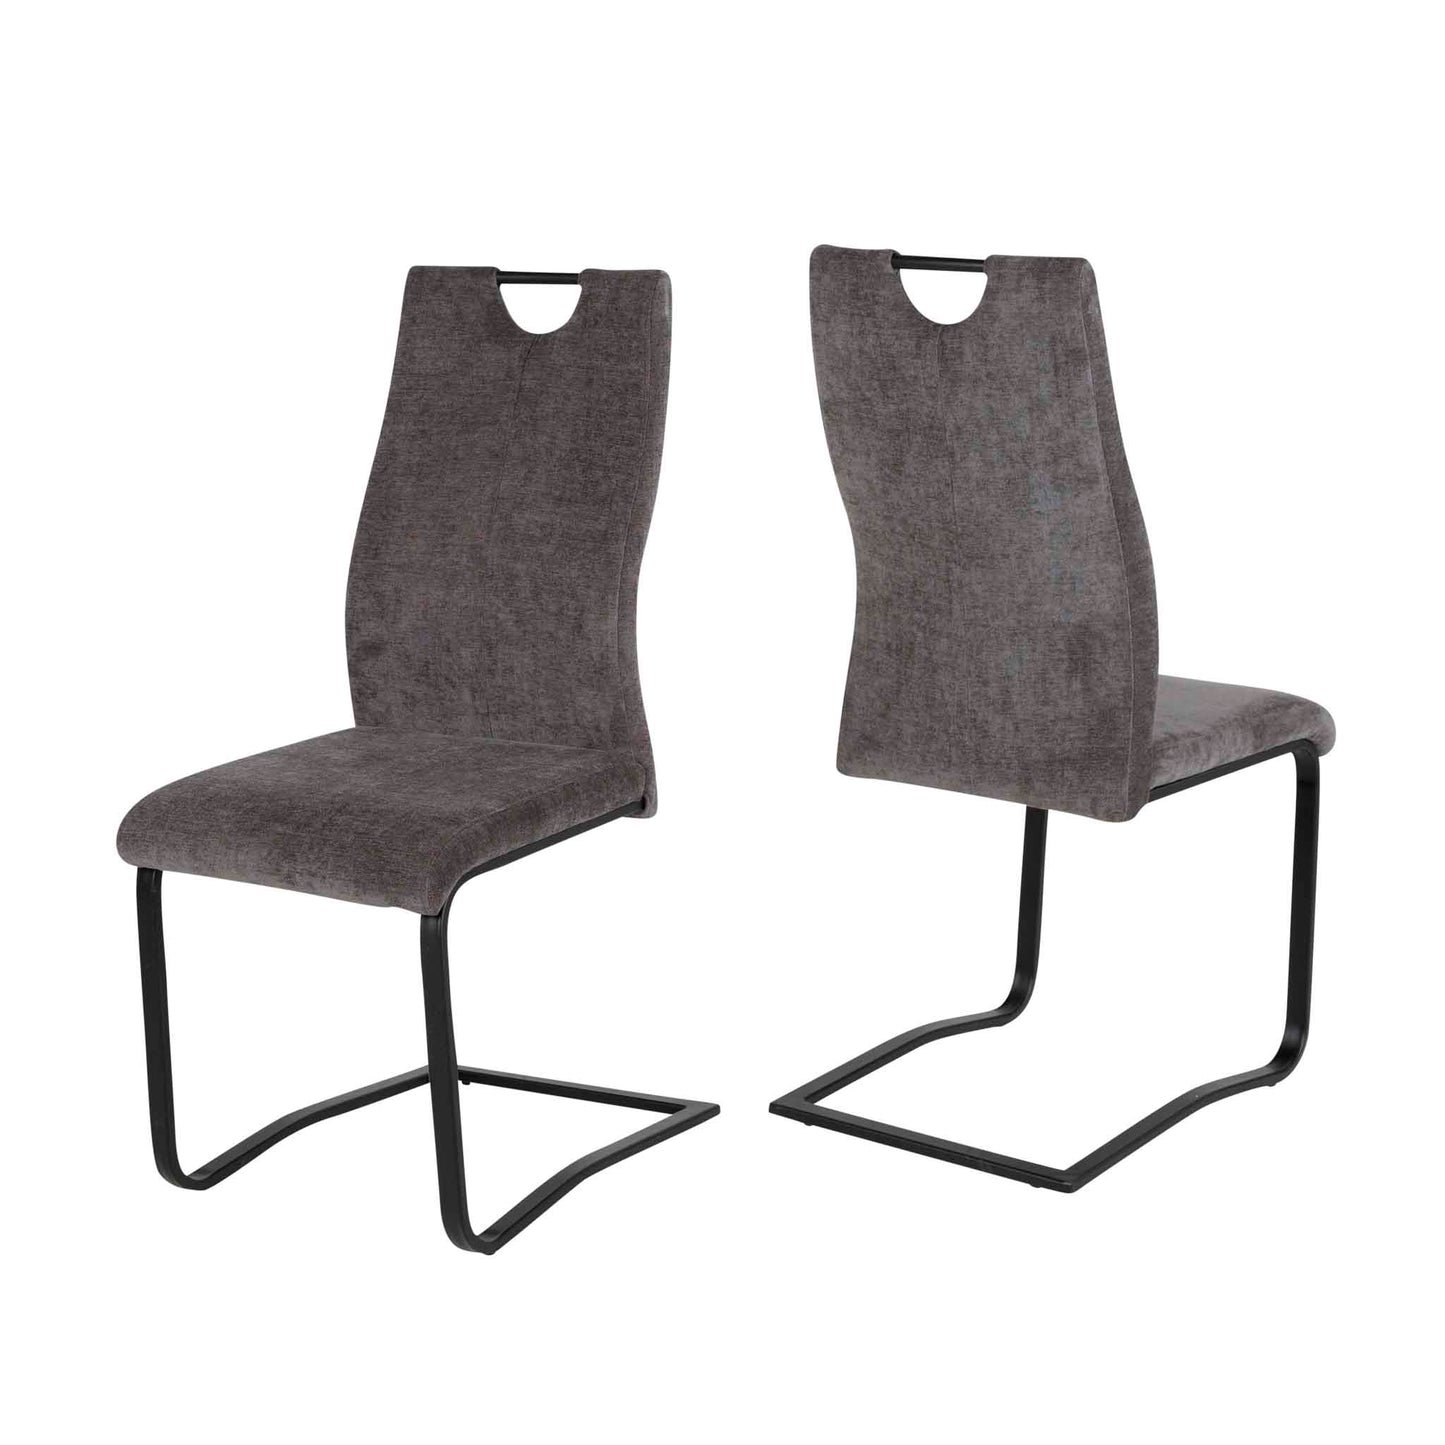 Campbell kitchen chair grey